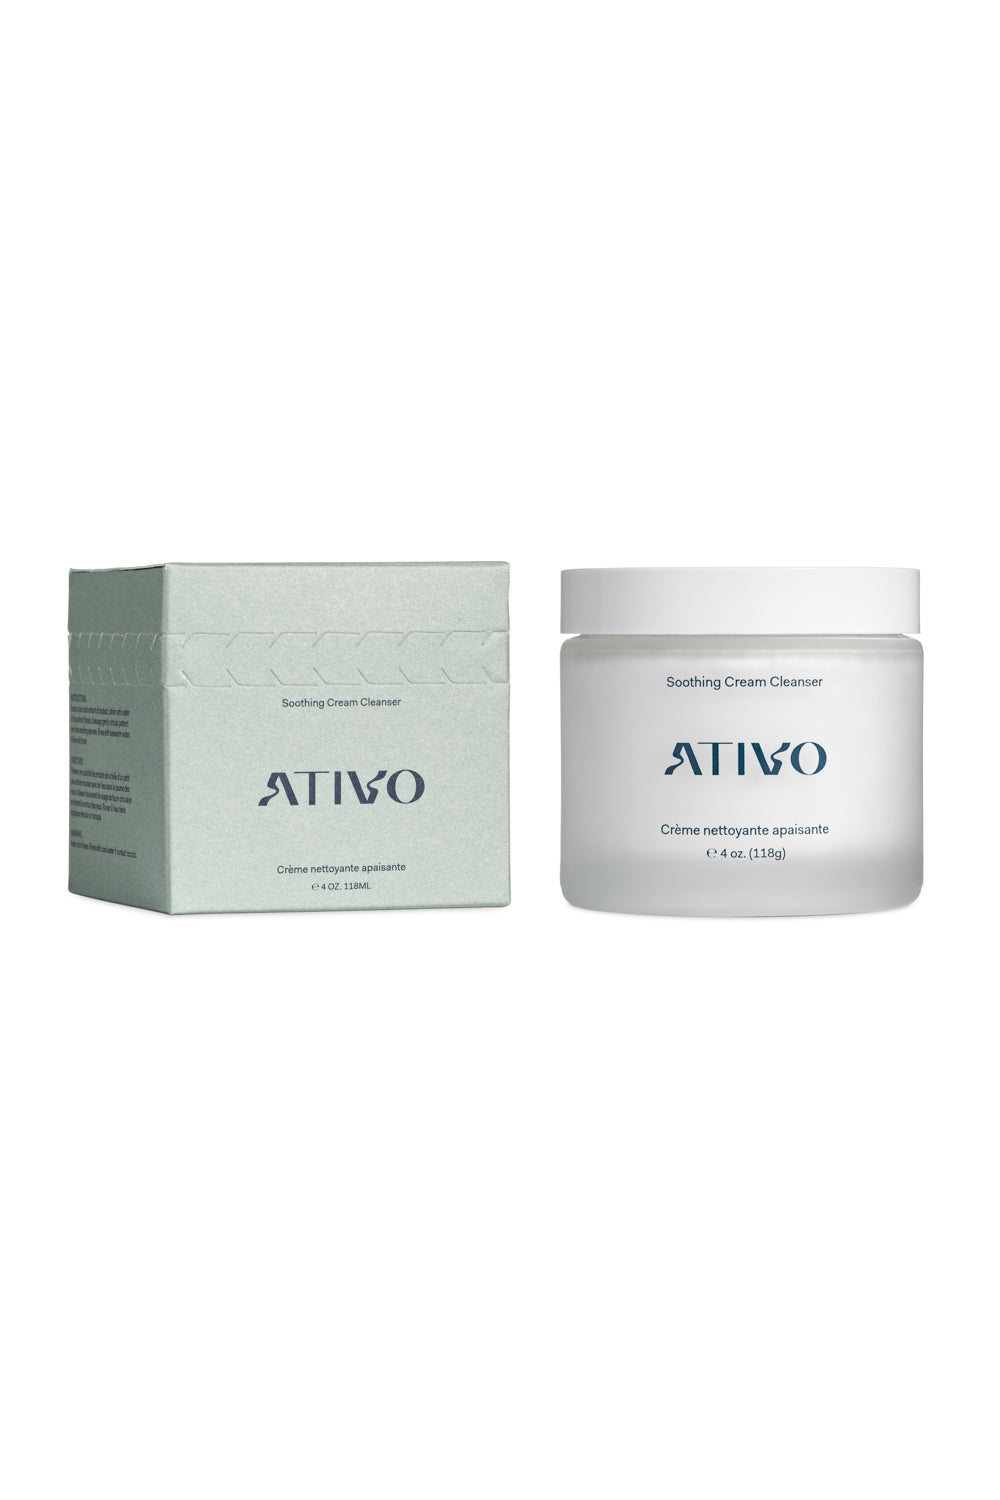 Ativo-Soothing-Cream-Cleanser